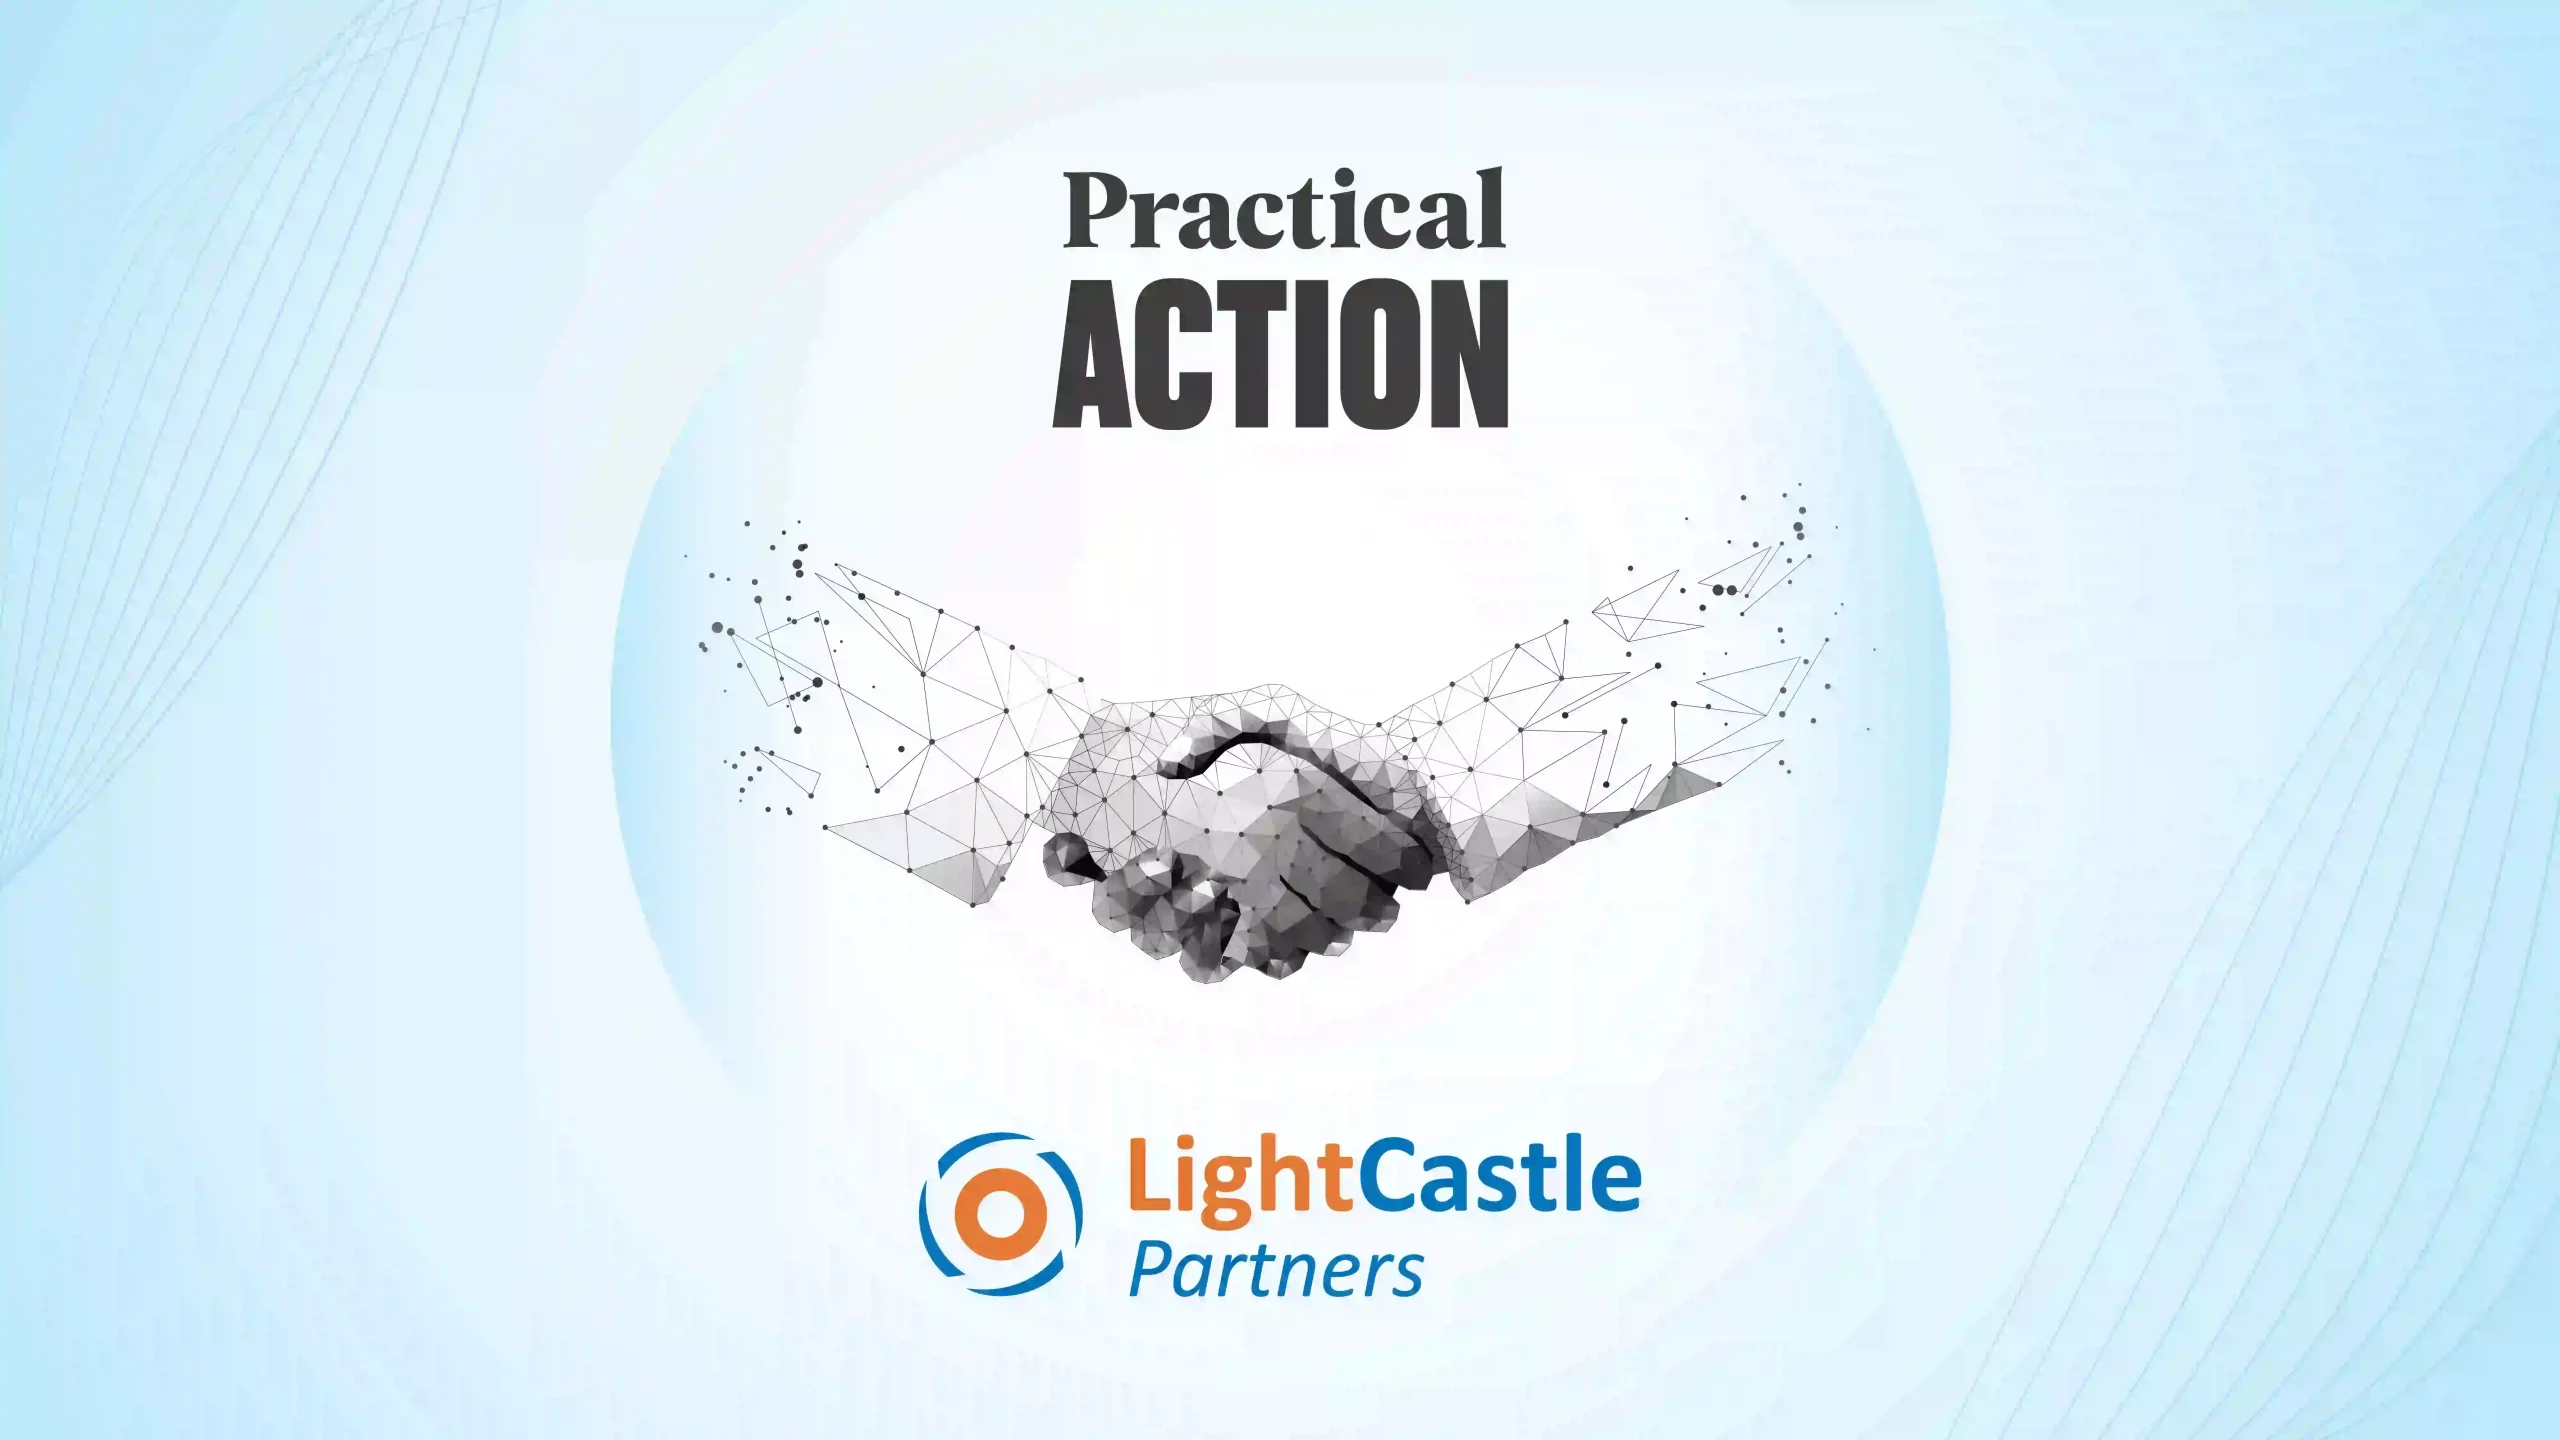 LightCastle Partners Signs Agreement with Practical Action to Promote Adoption of Clean Cooking Technologies